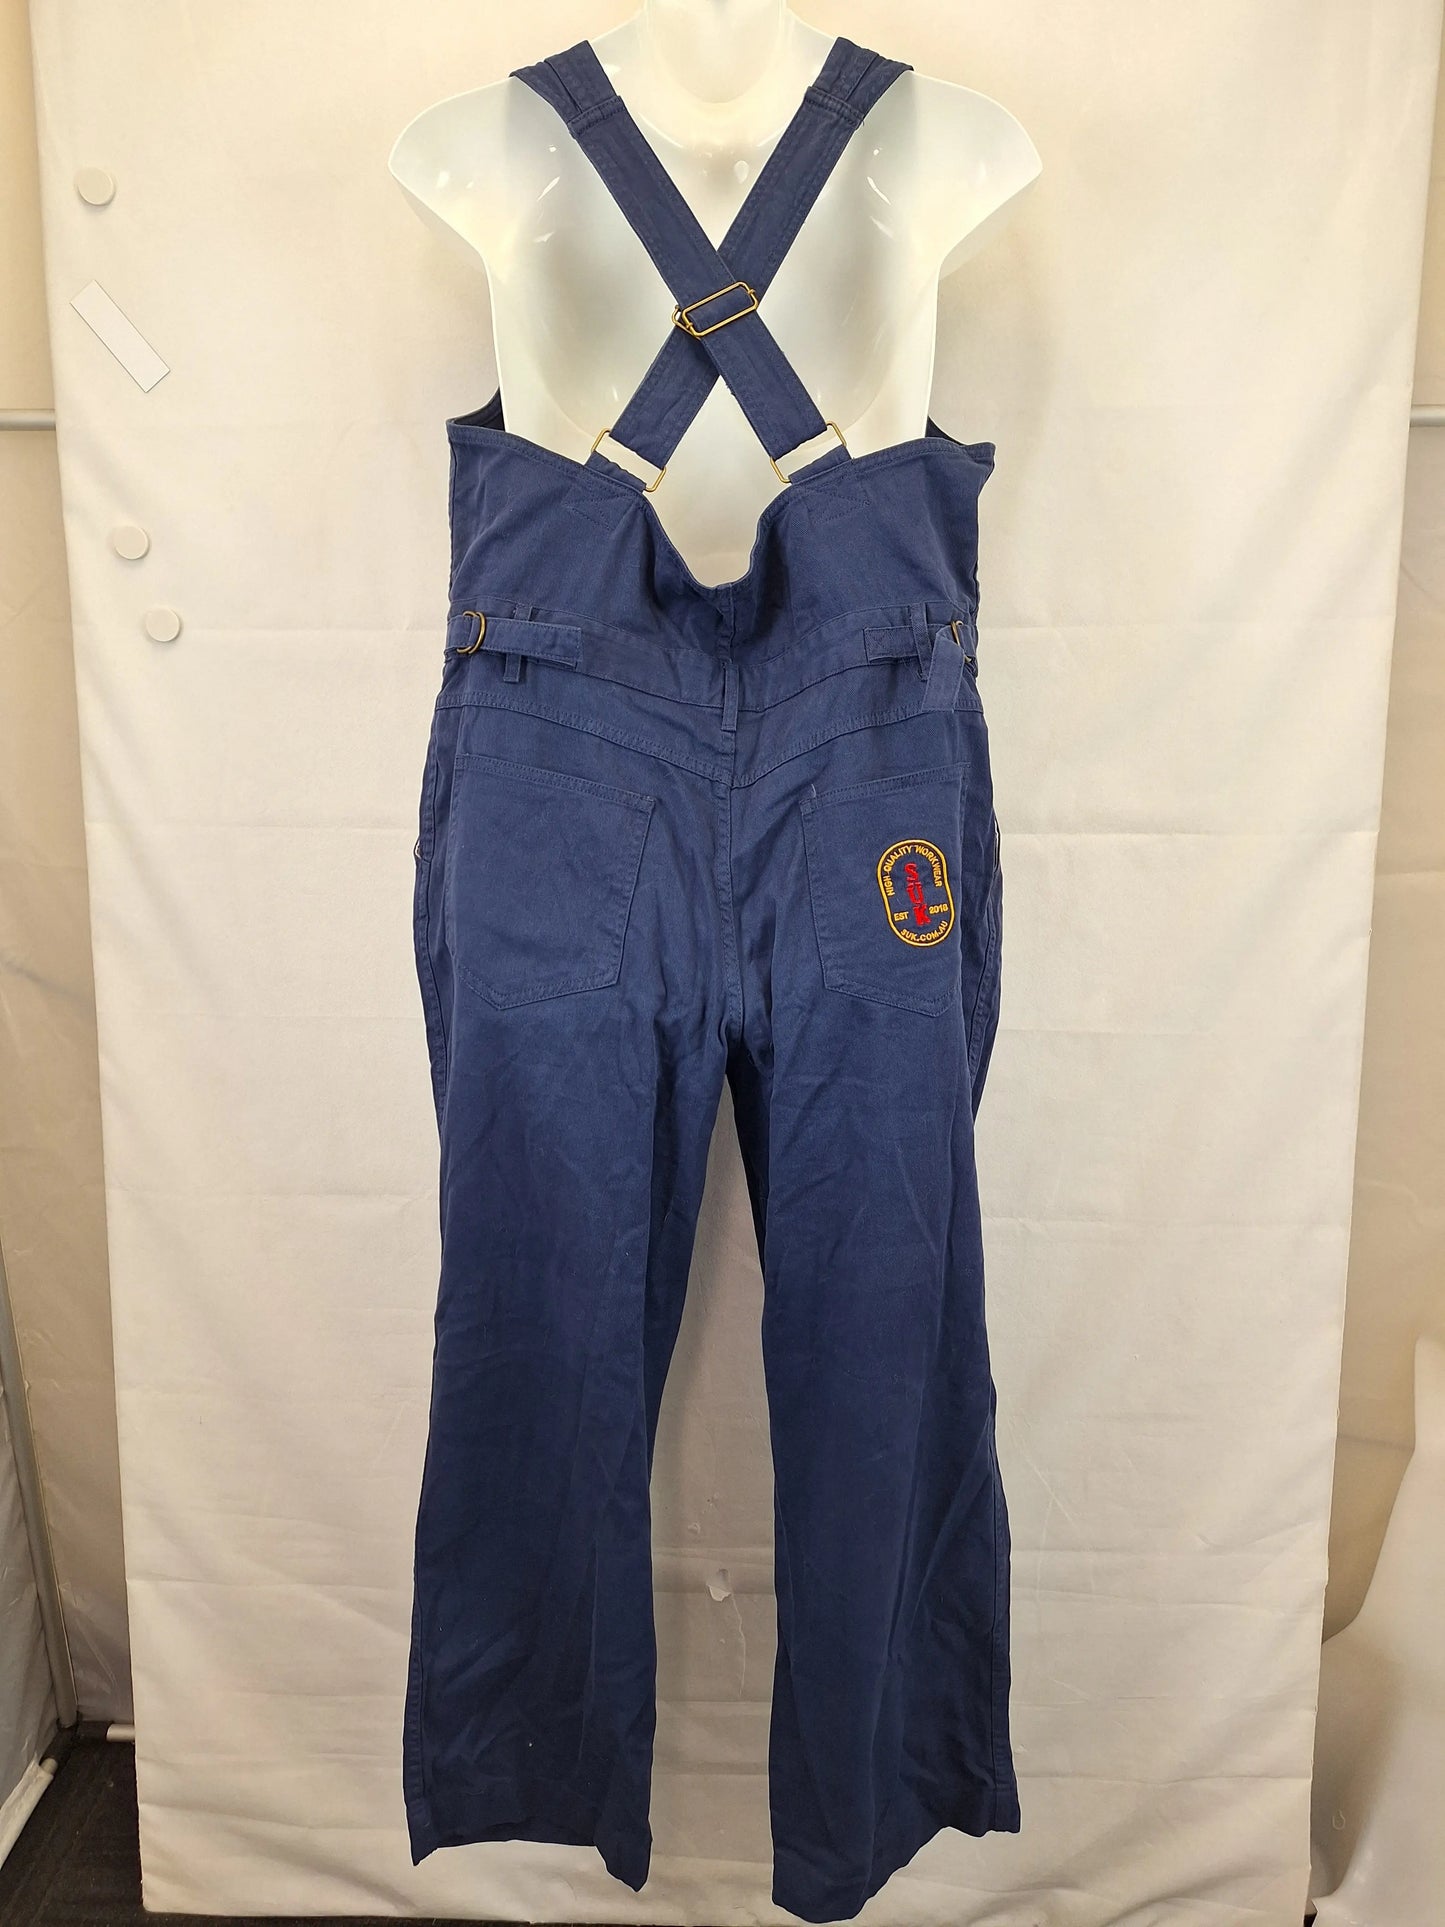 SUK Navy Roper Workwear Overall Size 18 by SwapUp-Online Second Hand Store-Online Thrift Store